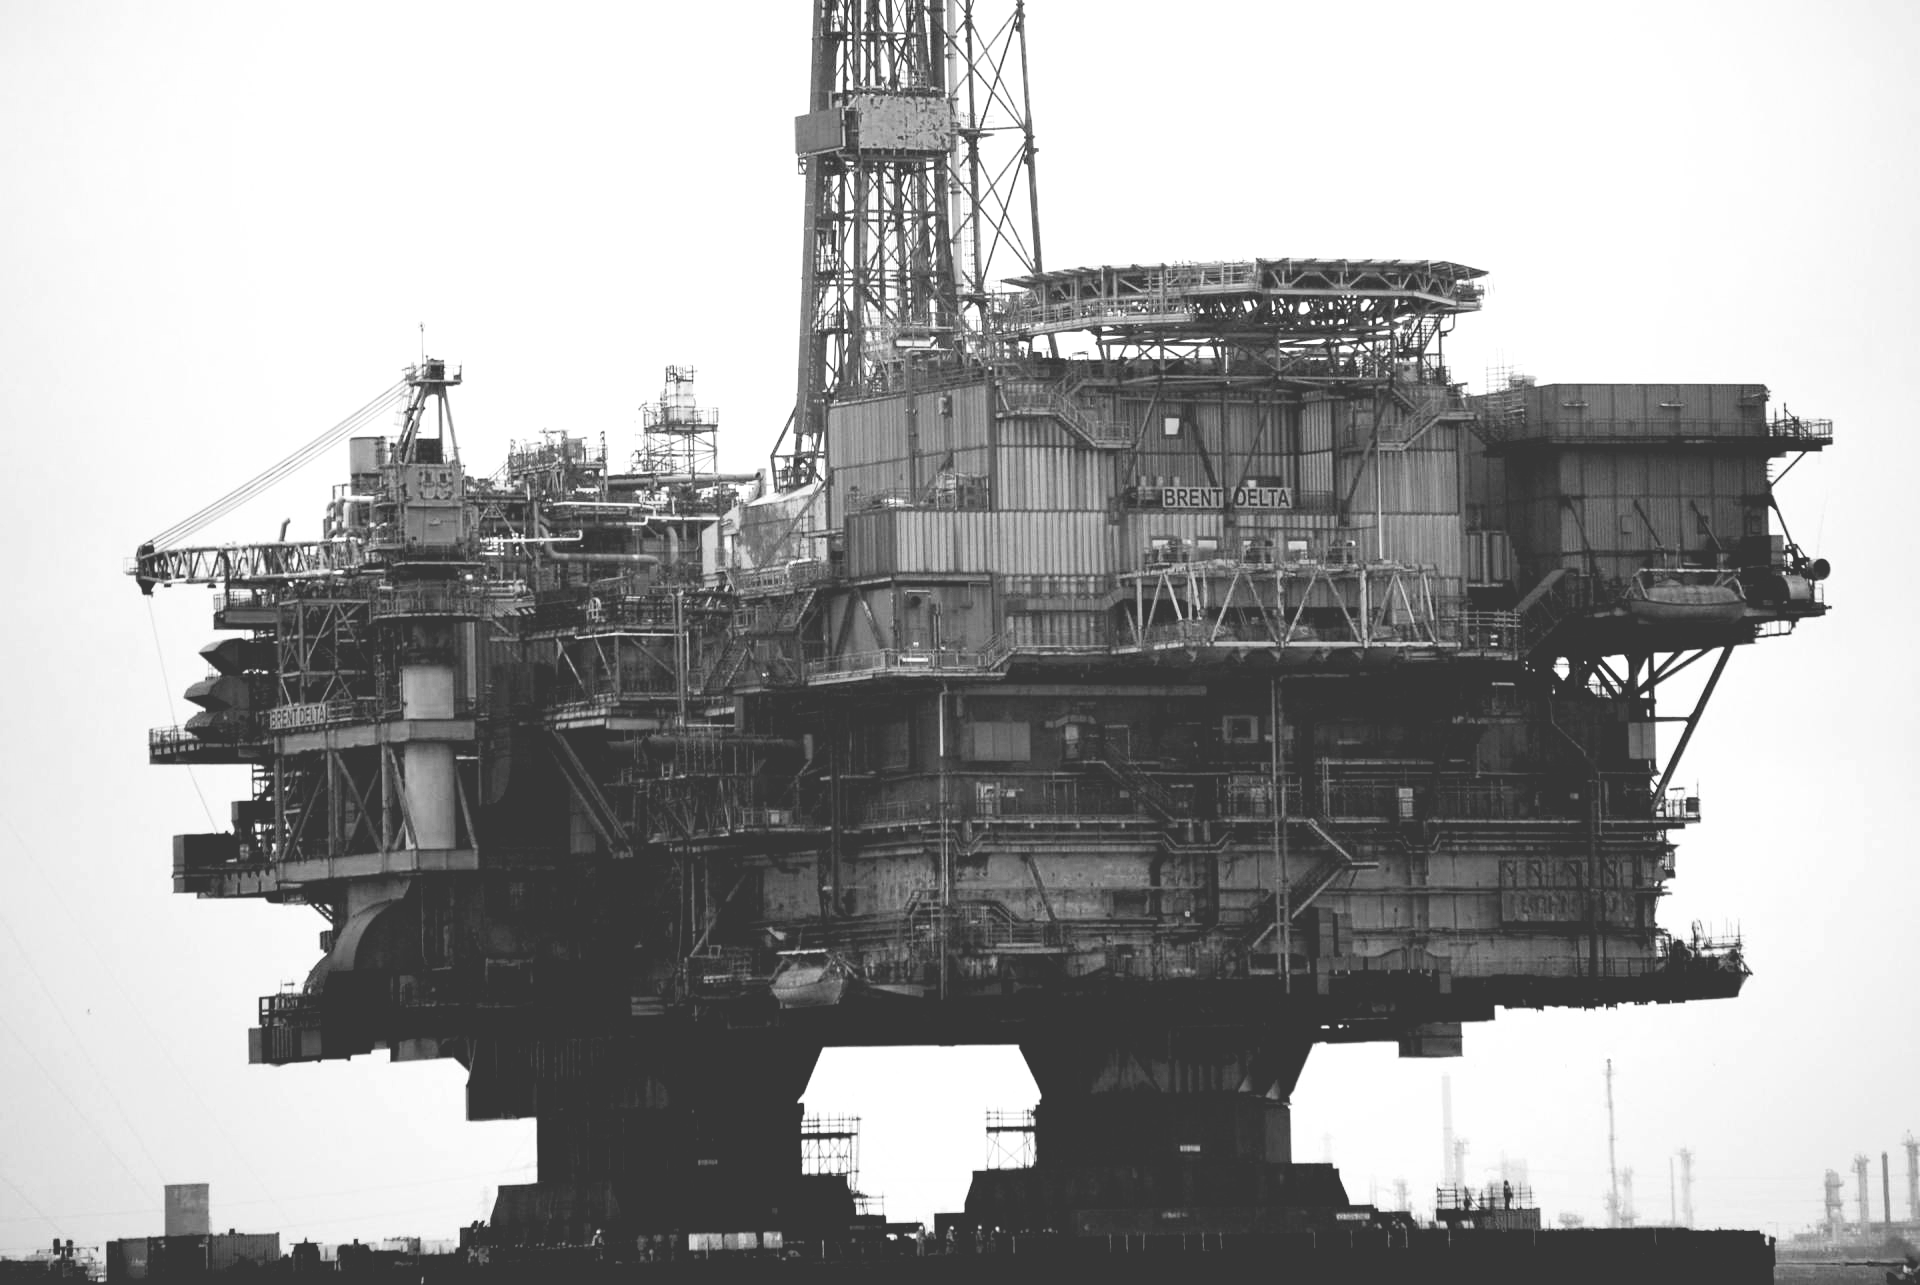 A black and white photo of an oil rig in the ocean.